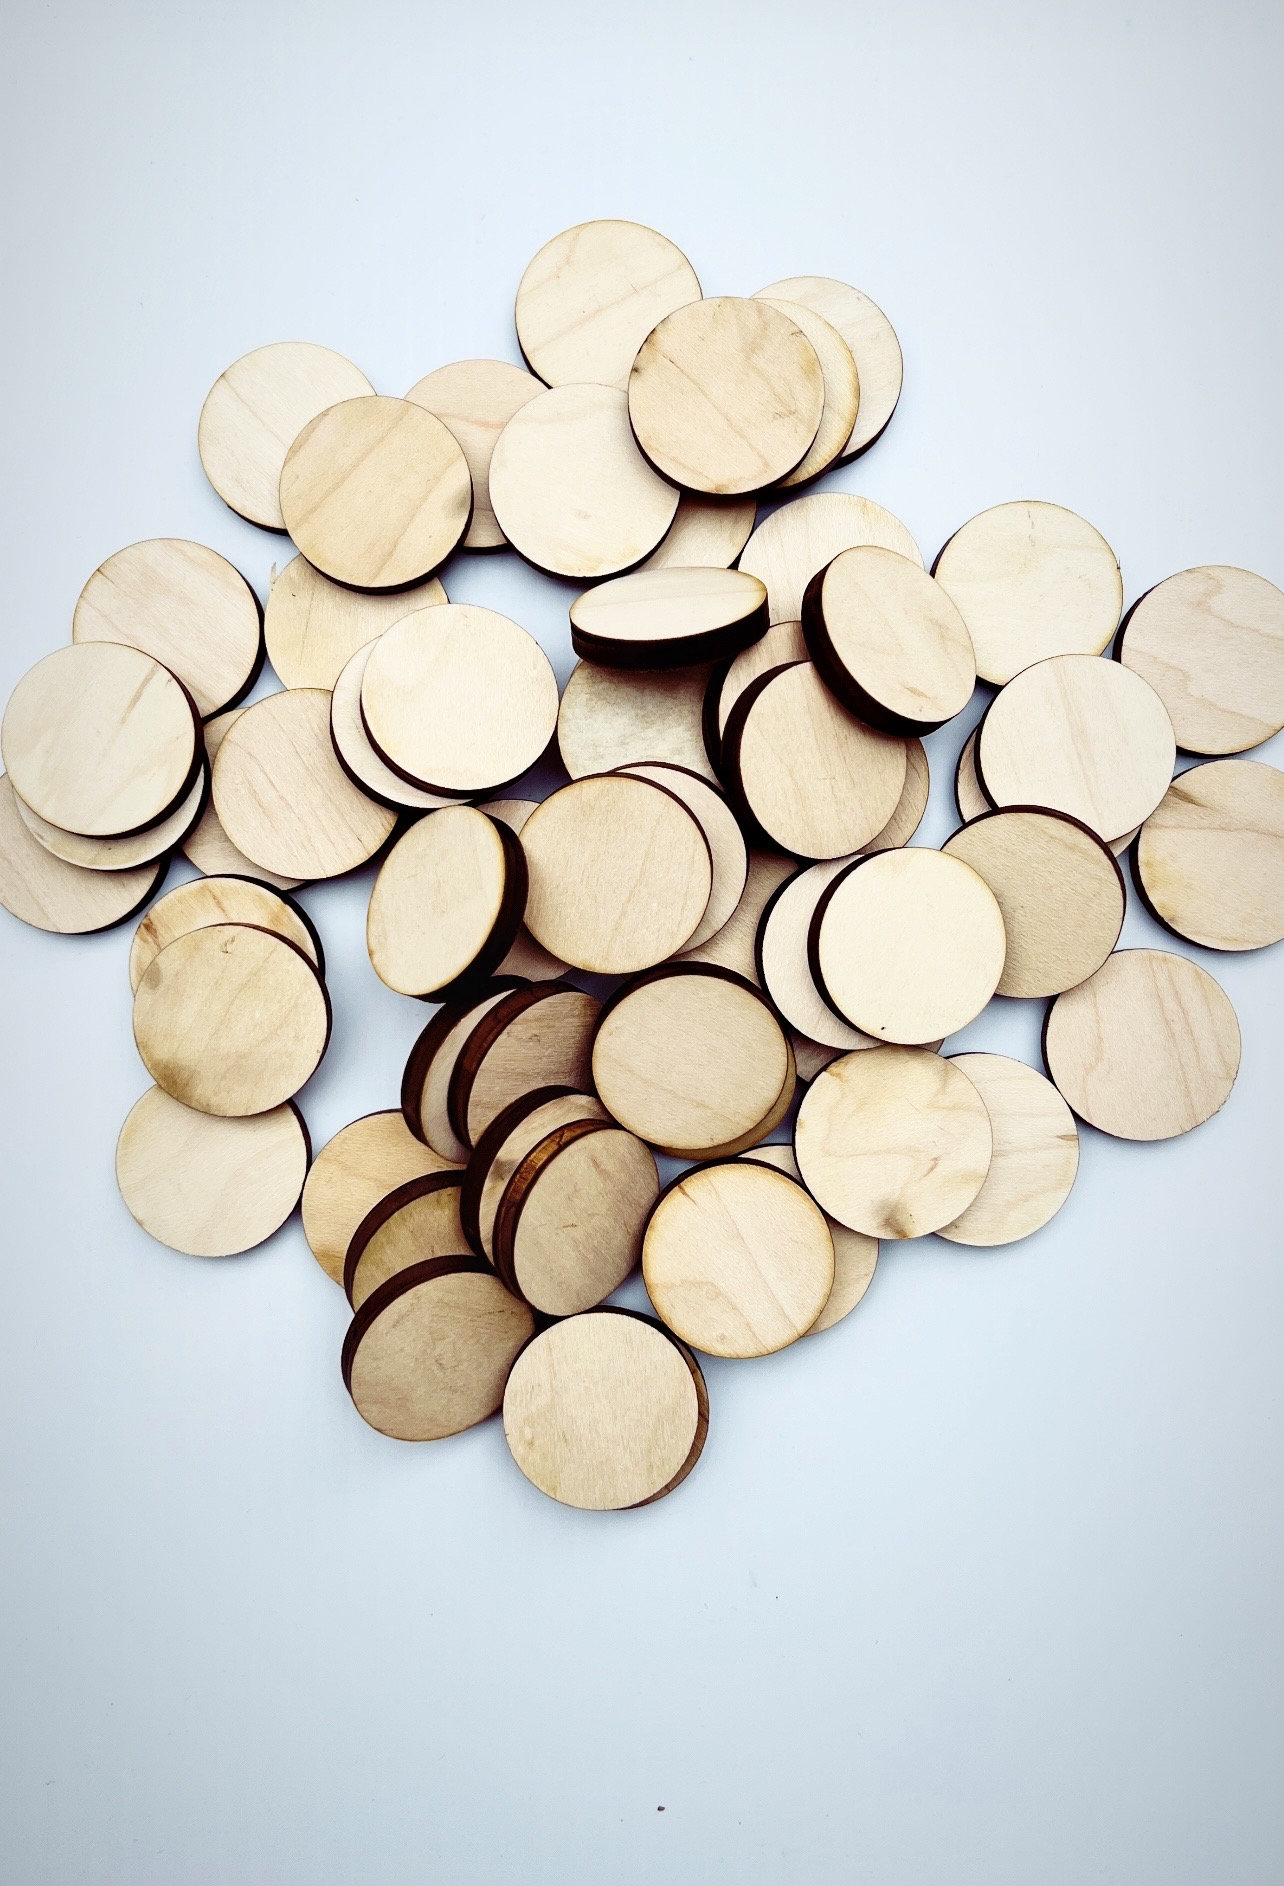 100Pcs Unfinished Wooden Circles with Holes 1.5 Inch Wood Rounds Tags Blank  Natural Round Wood Discs for Crafts Wooden Circle Cutouts Ornaments for